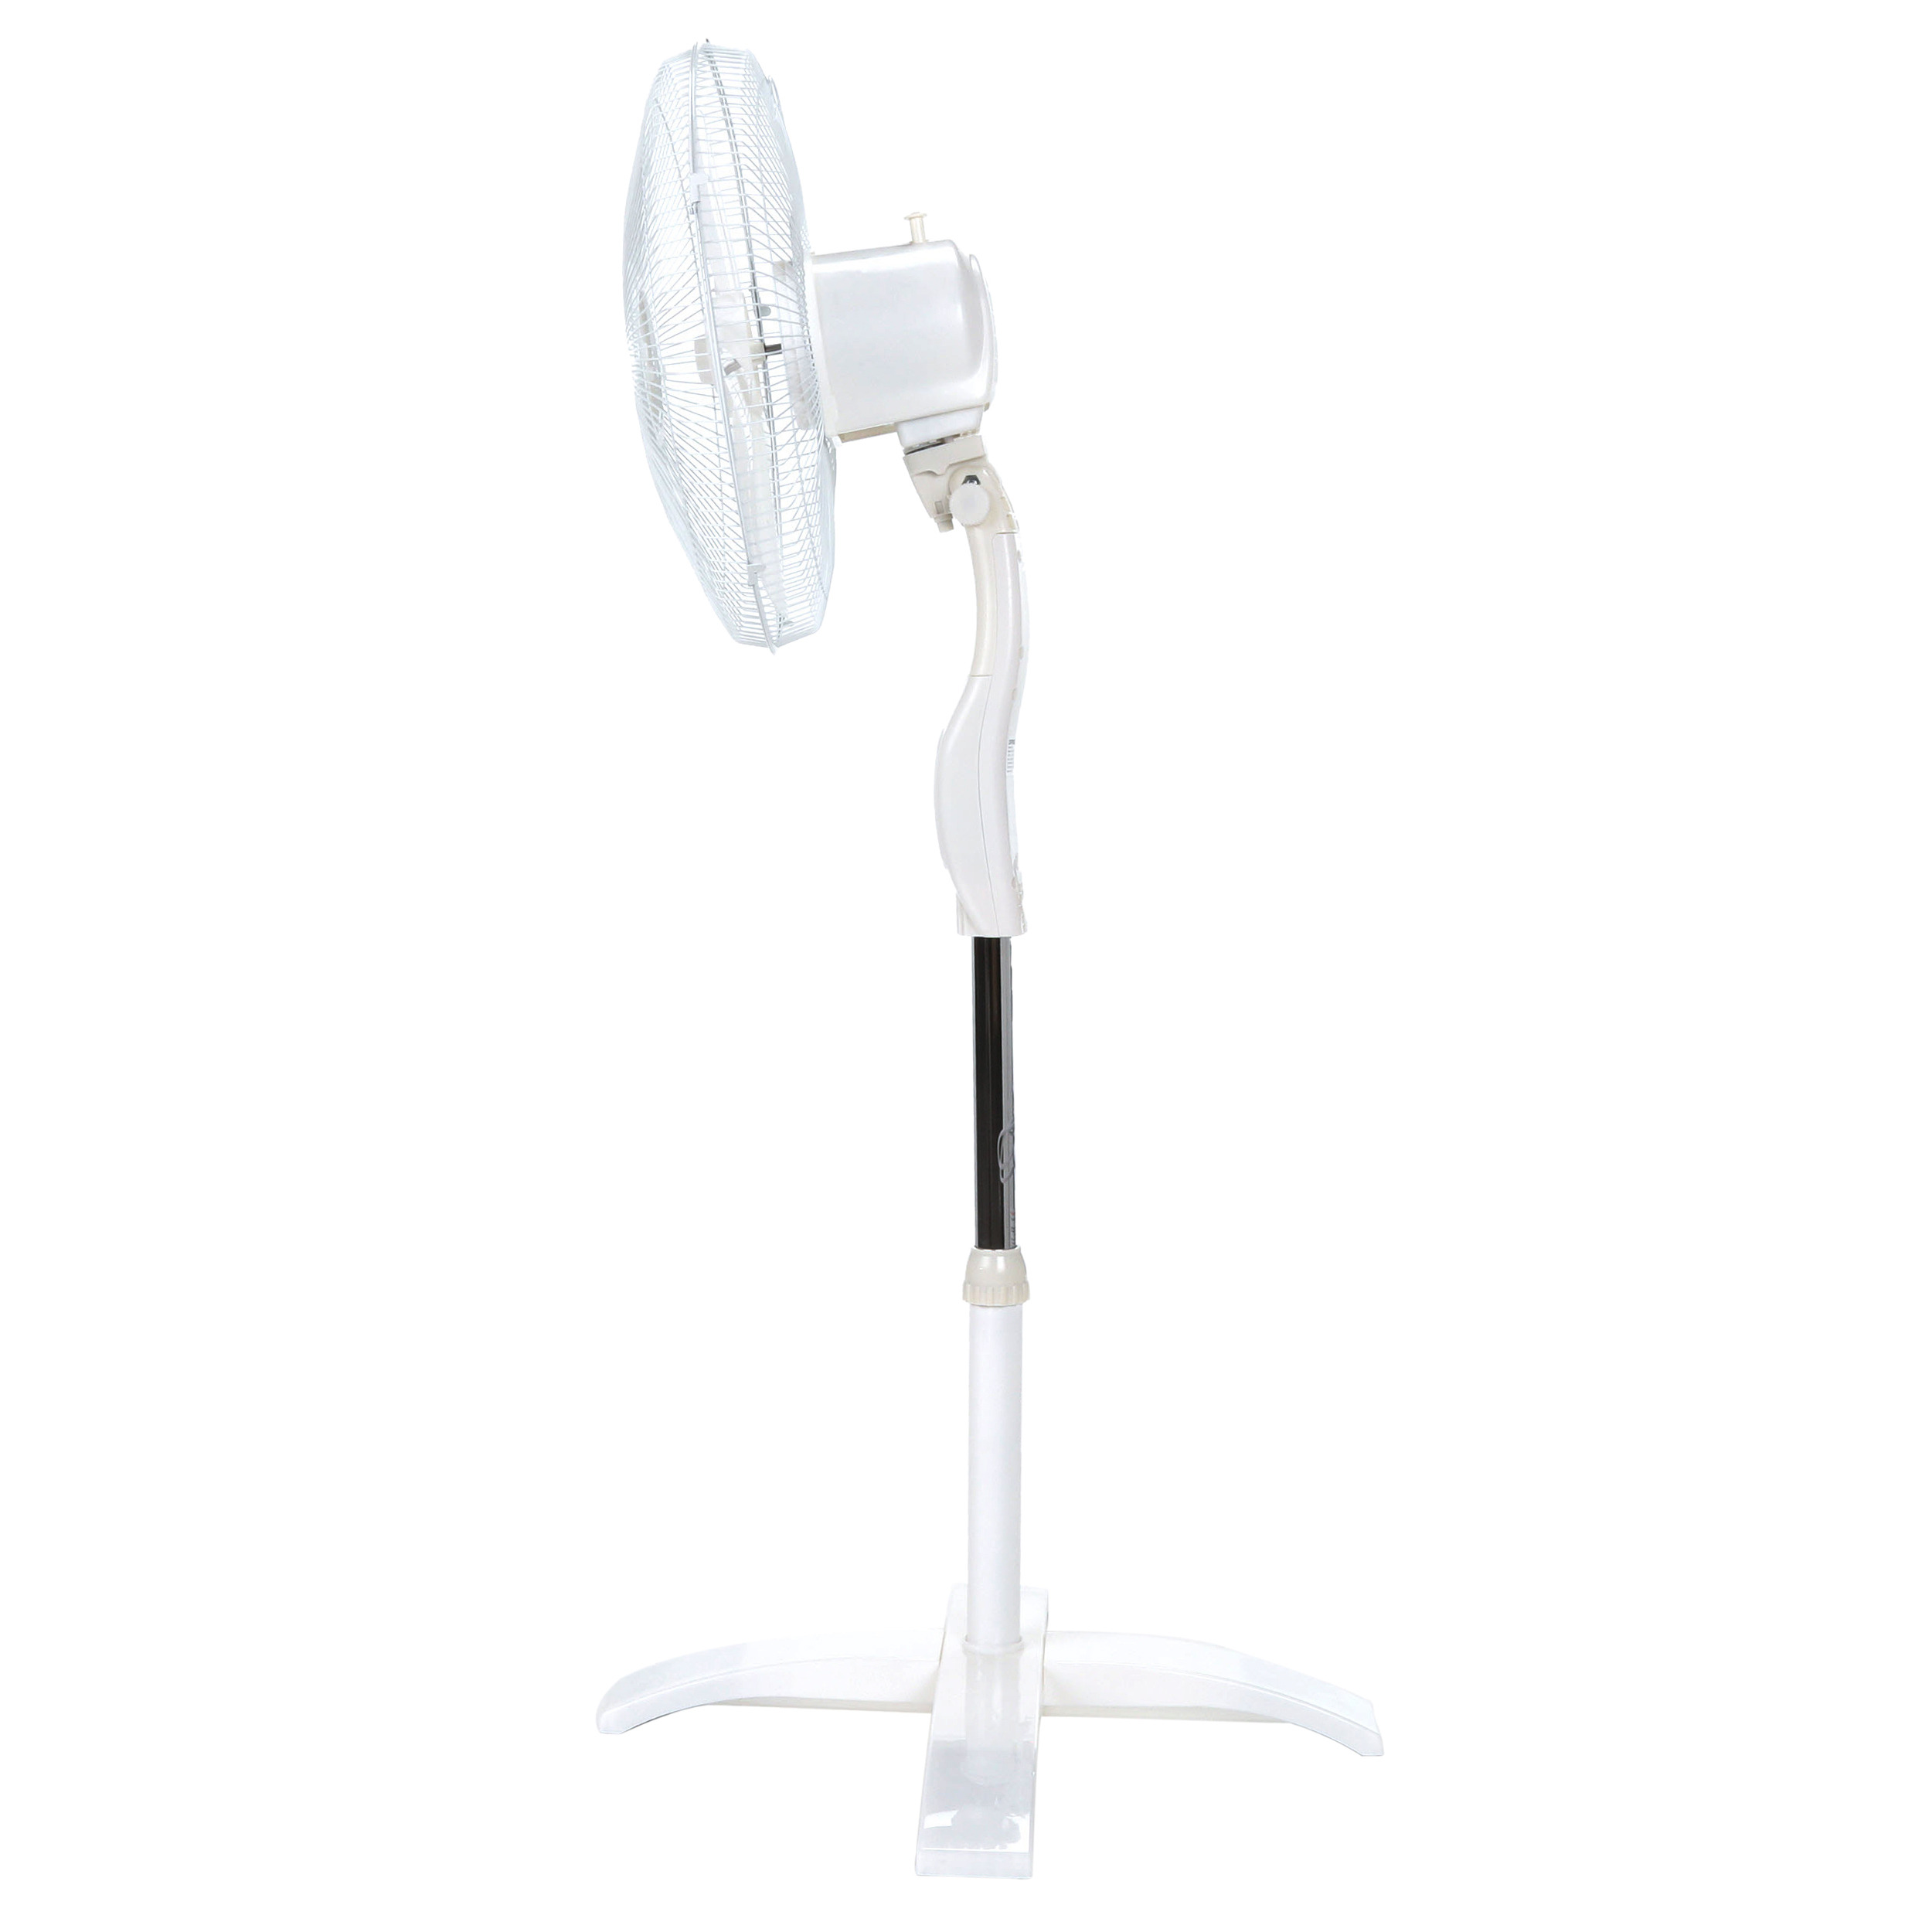 Optimus F-1760 16 inch Oscillating Electric Stand Fan with Remote, White - image 4 of 7